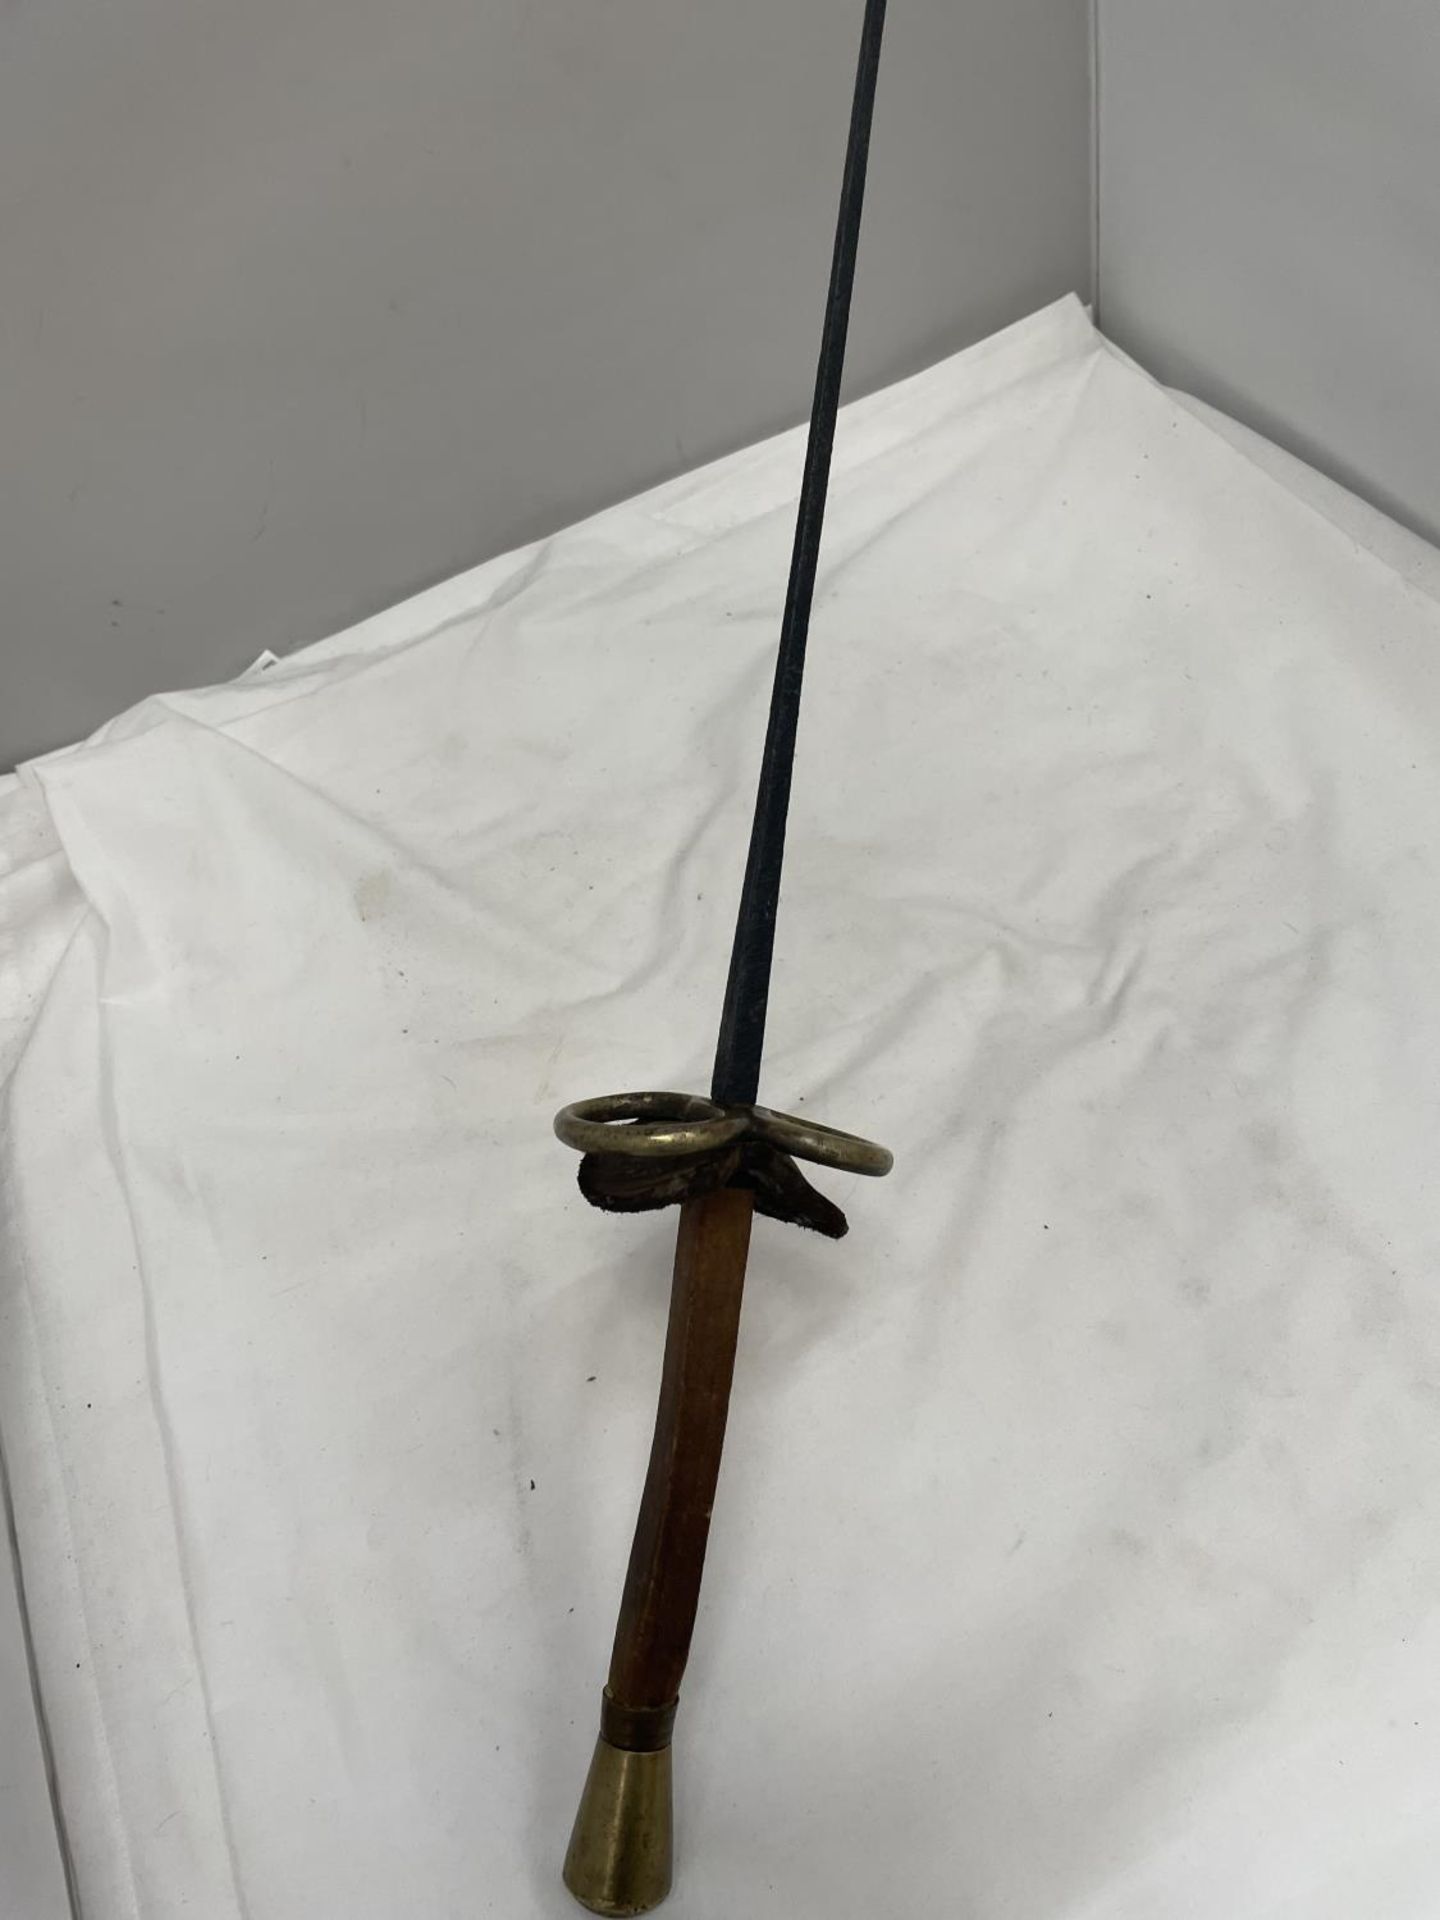 A VINTAGE RAPIER SWORD LENGTH APPROX 89CM AND A HAND CARVED AFRICAN WEAPON LENGTH 59CM - Image 5 of 7